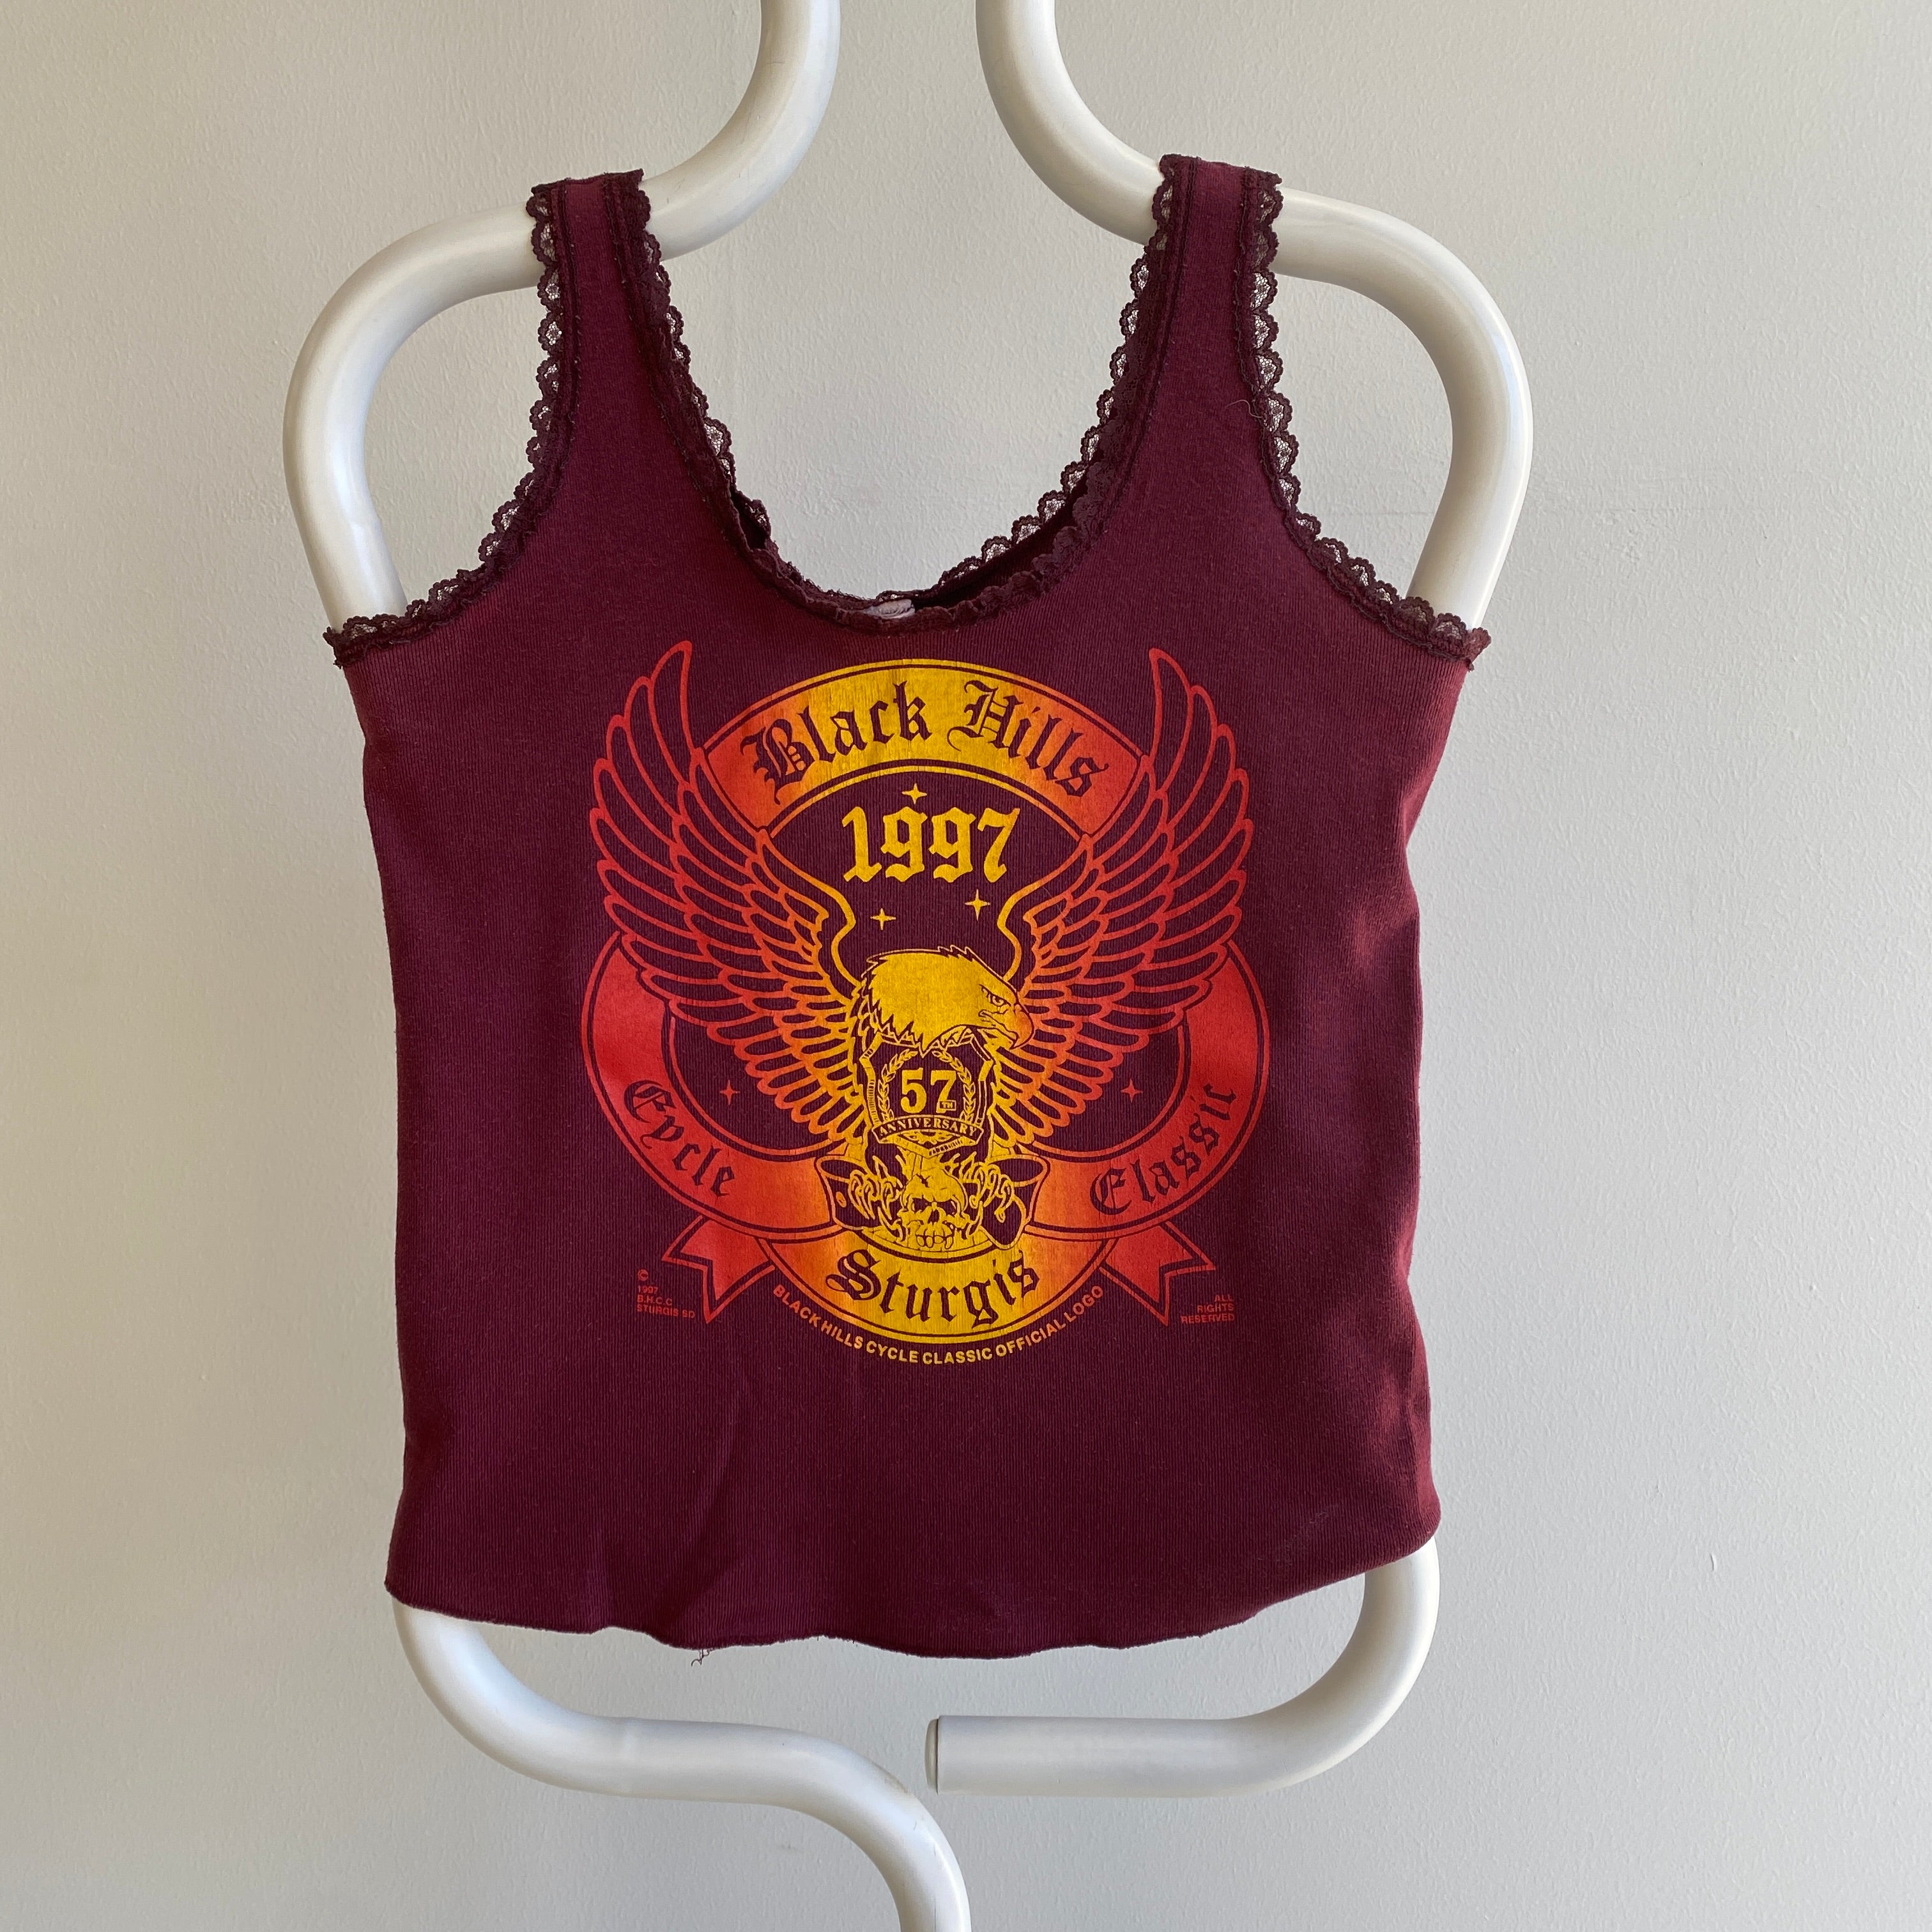 1997 Sturgis 57 Year Anniversary Tank Top with Lace